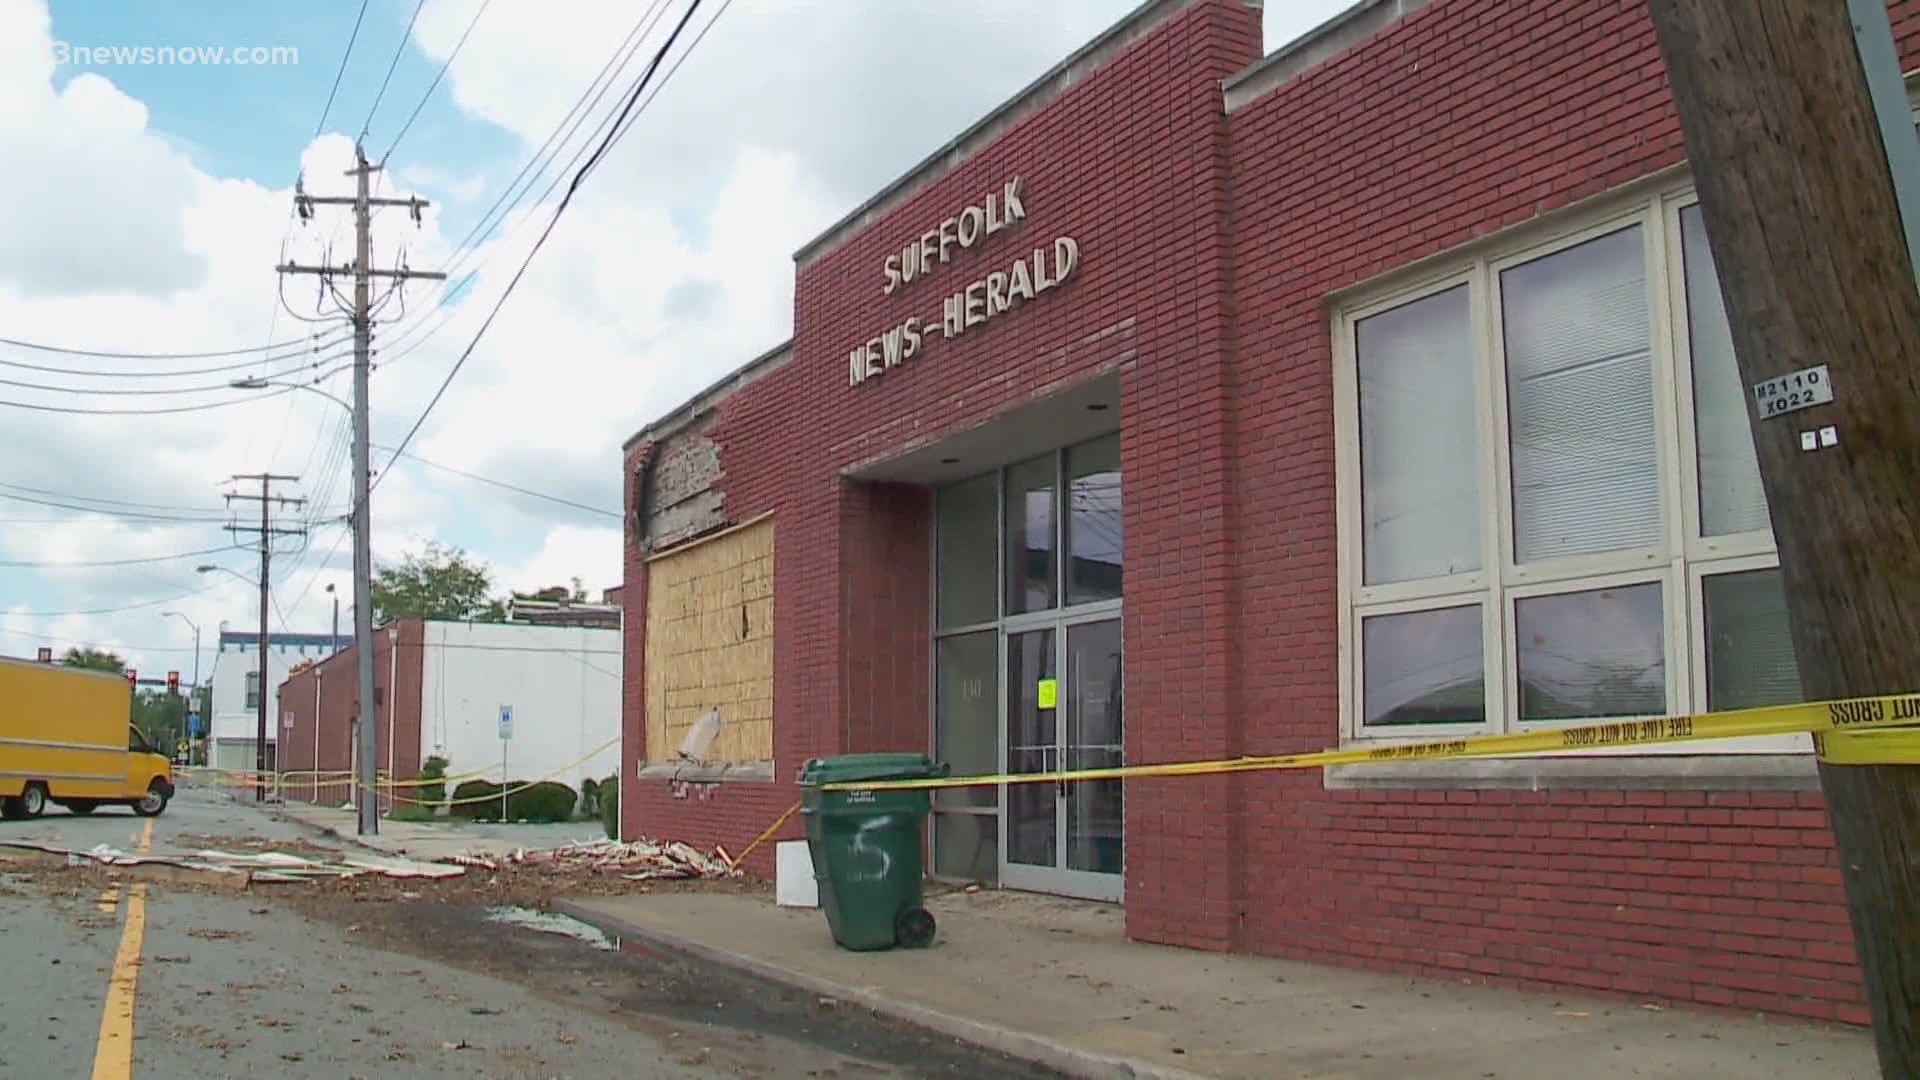 The Suffolk News-Herald is one of the many businesses whose employees are forced to work from home or at another building after a tornado hit on Tuesday.